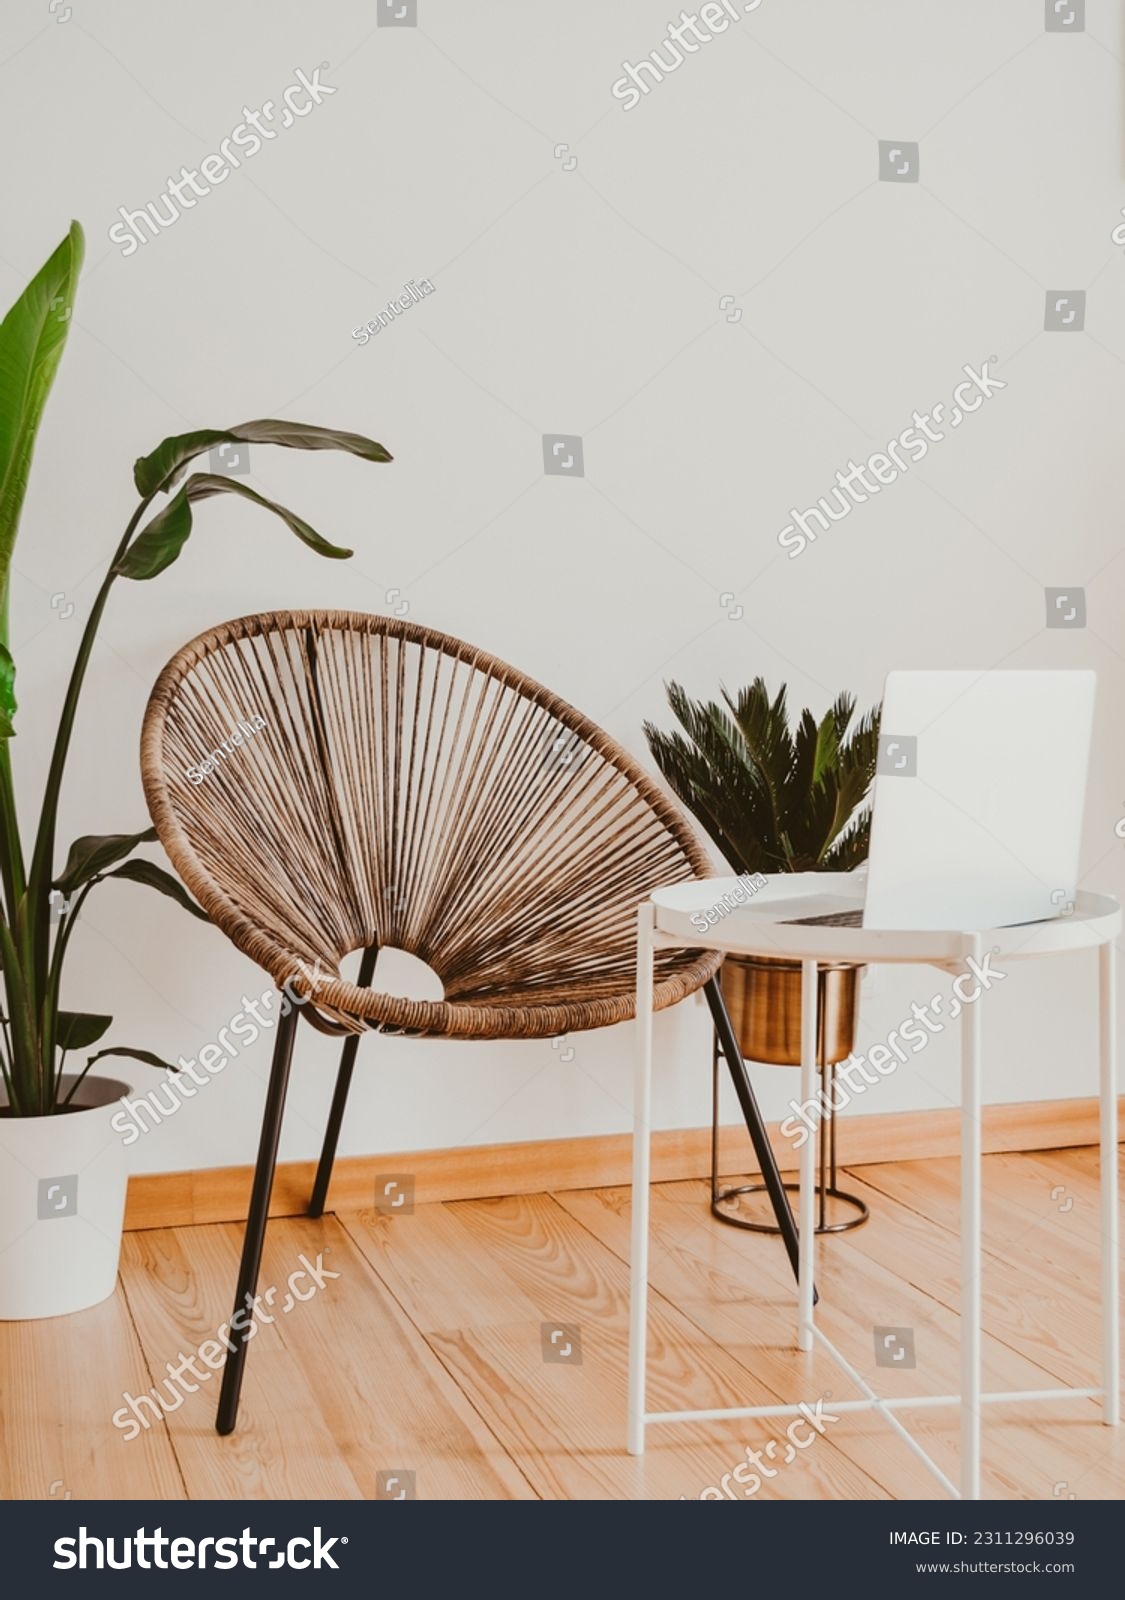 A wicker chair against white wall with large potted plants and white table with open laptop. Modern interior living room. Minimal bright interior. #2311296039